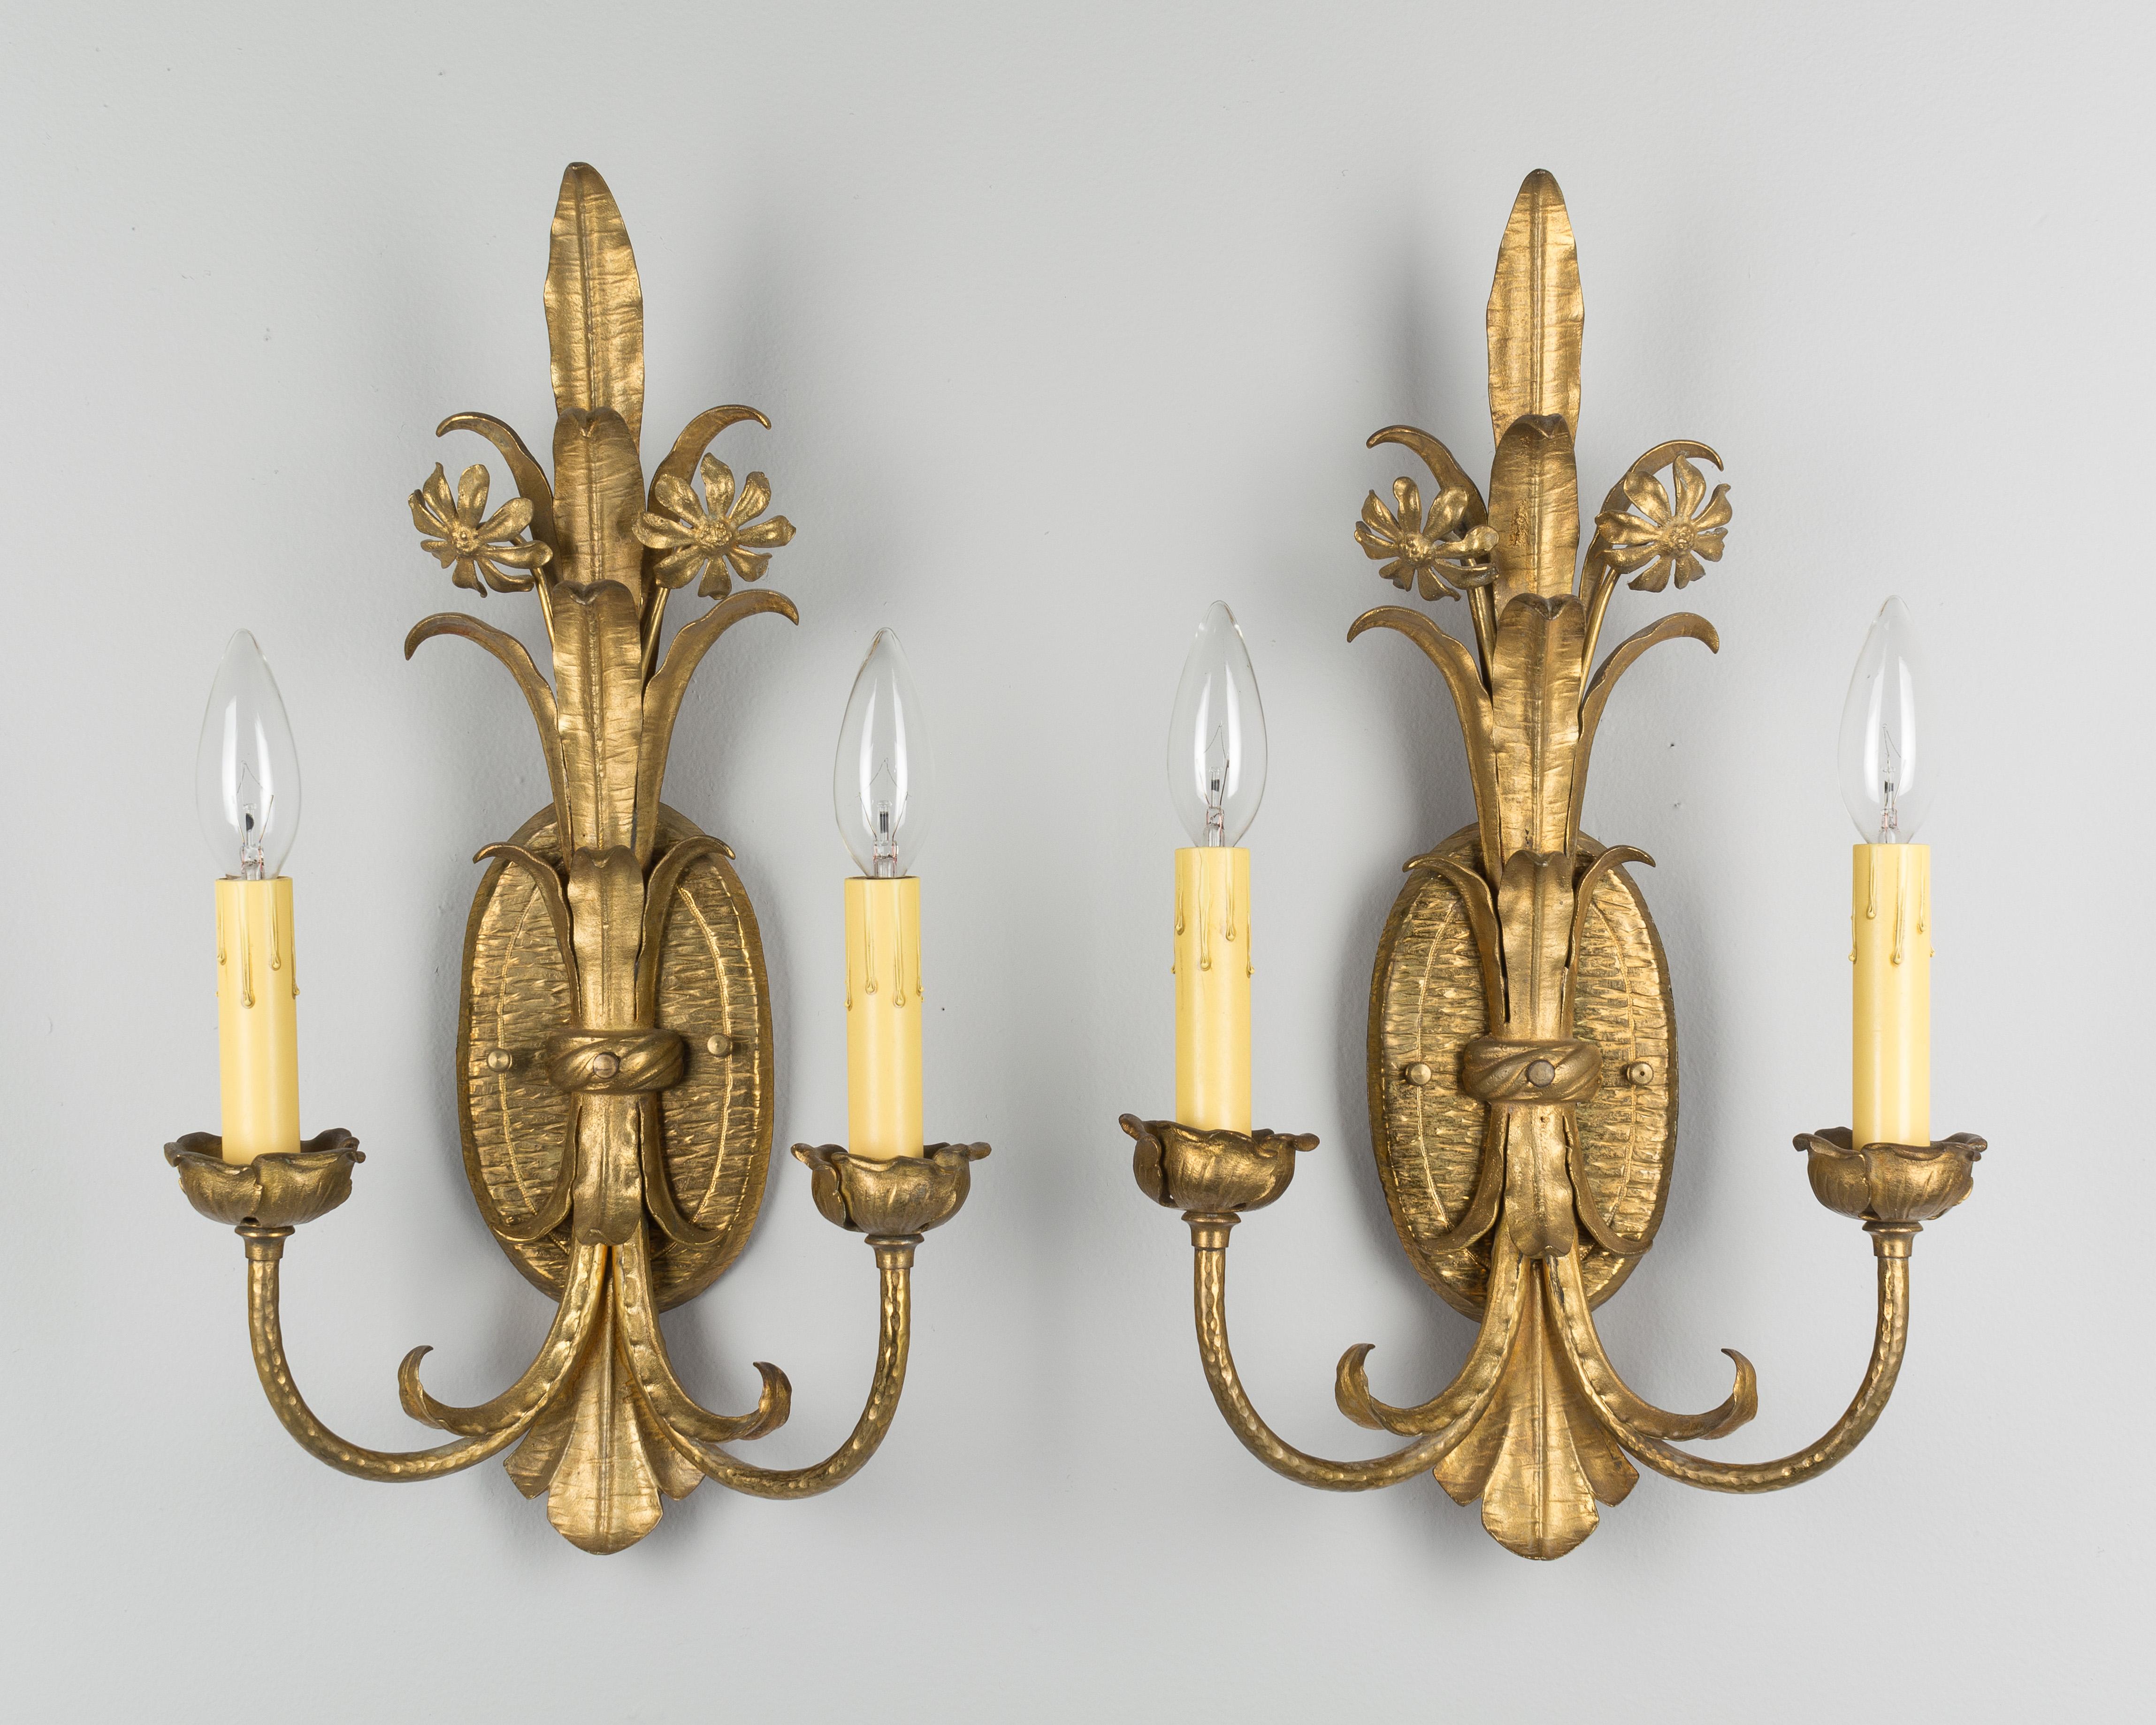 A pair of Louis XV style two-light bronze sconces. Oval backplate with foliate and floral motif. In excellent condition with bright gold patina. New candle covers. Wired as found.
 